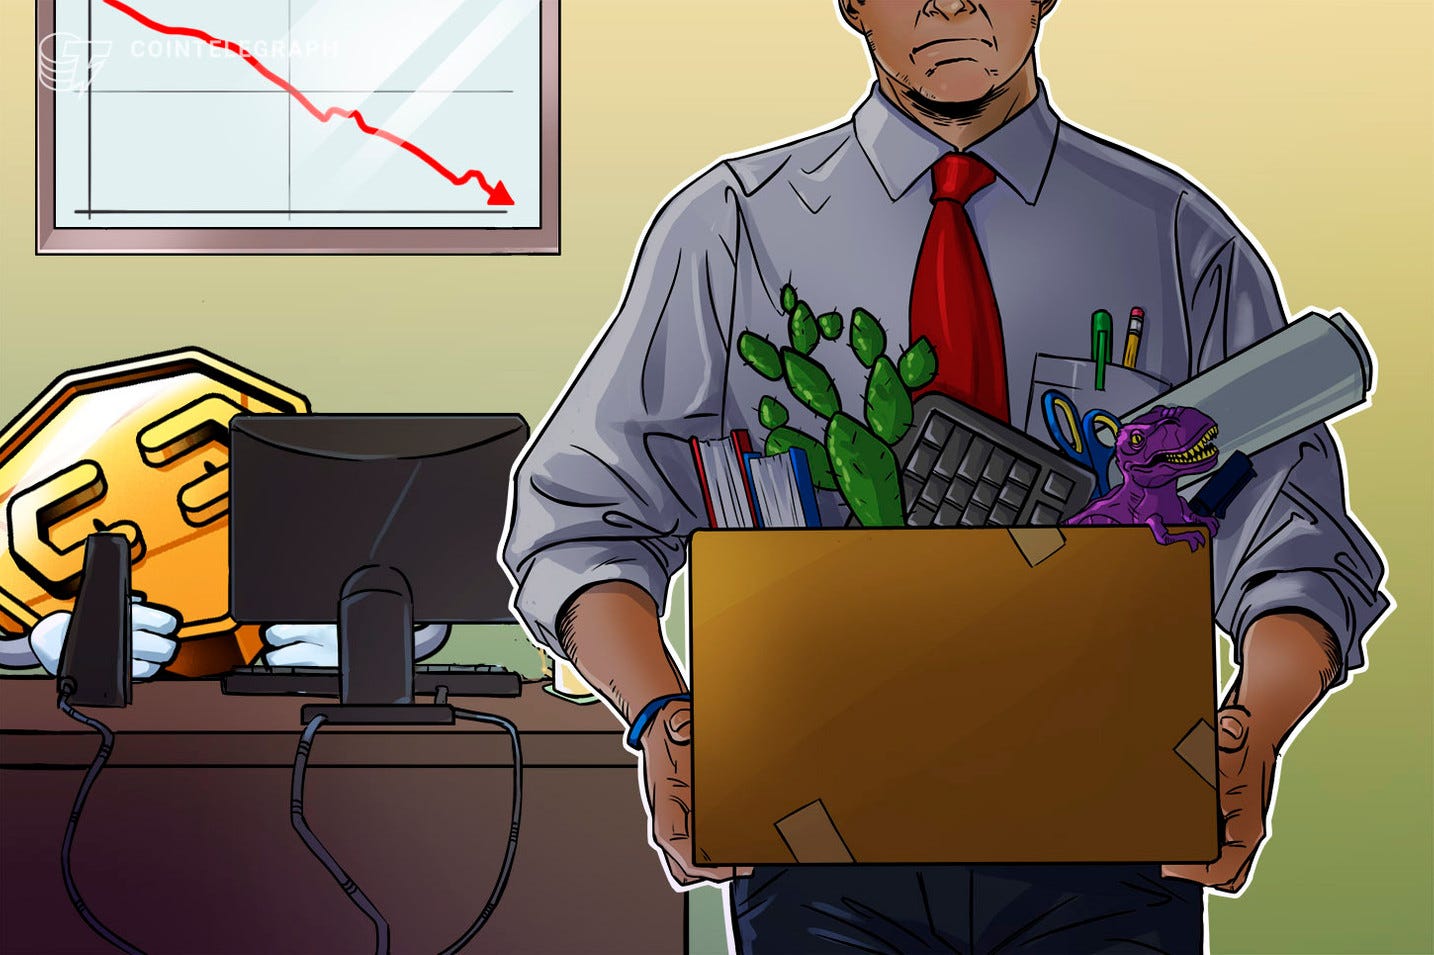 Major crypto firms reportedly cut up to 10% of staff amid bear market